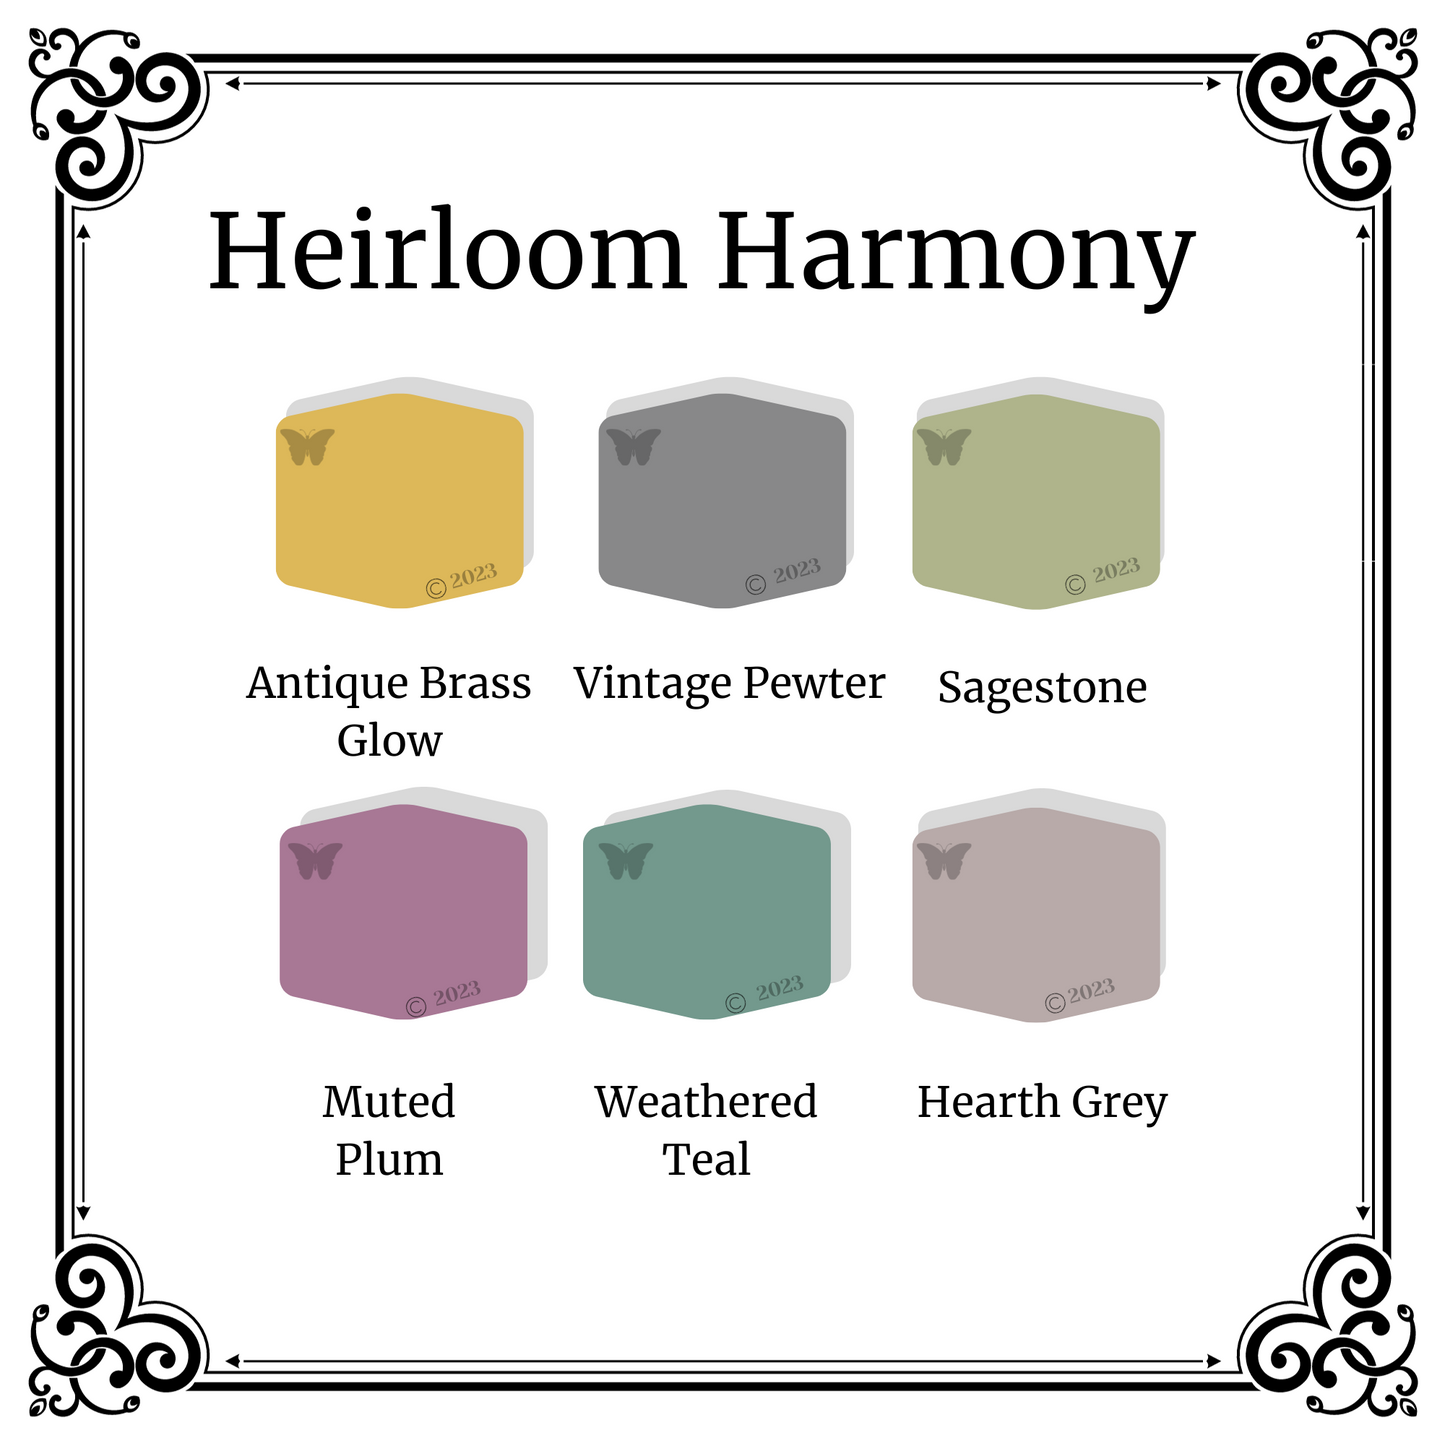 6 Color Page Polymer Clay Color Palette Heirloom Harmony.  Polymer Clay Color Palette Heirloom Harmony.  A black and white Victorian frame around 6 hexagons in muted shades of treasured heirlooms.   The title is Heirloom Harmony and the 6 colors are Antique Brass Glow, Vintage Pewter, Sagestone, Muted Plum, Weathered Teal, and Hearth Grey